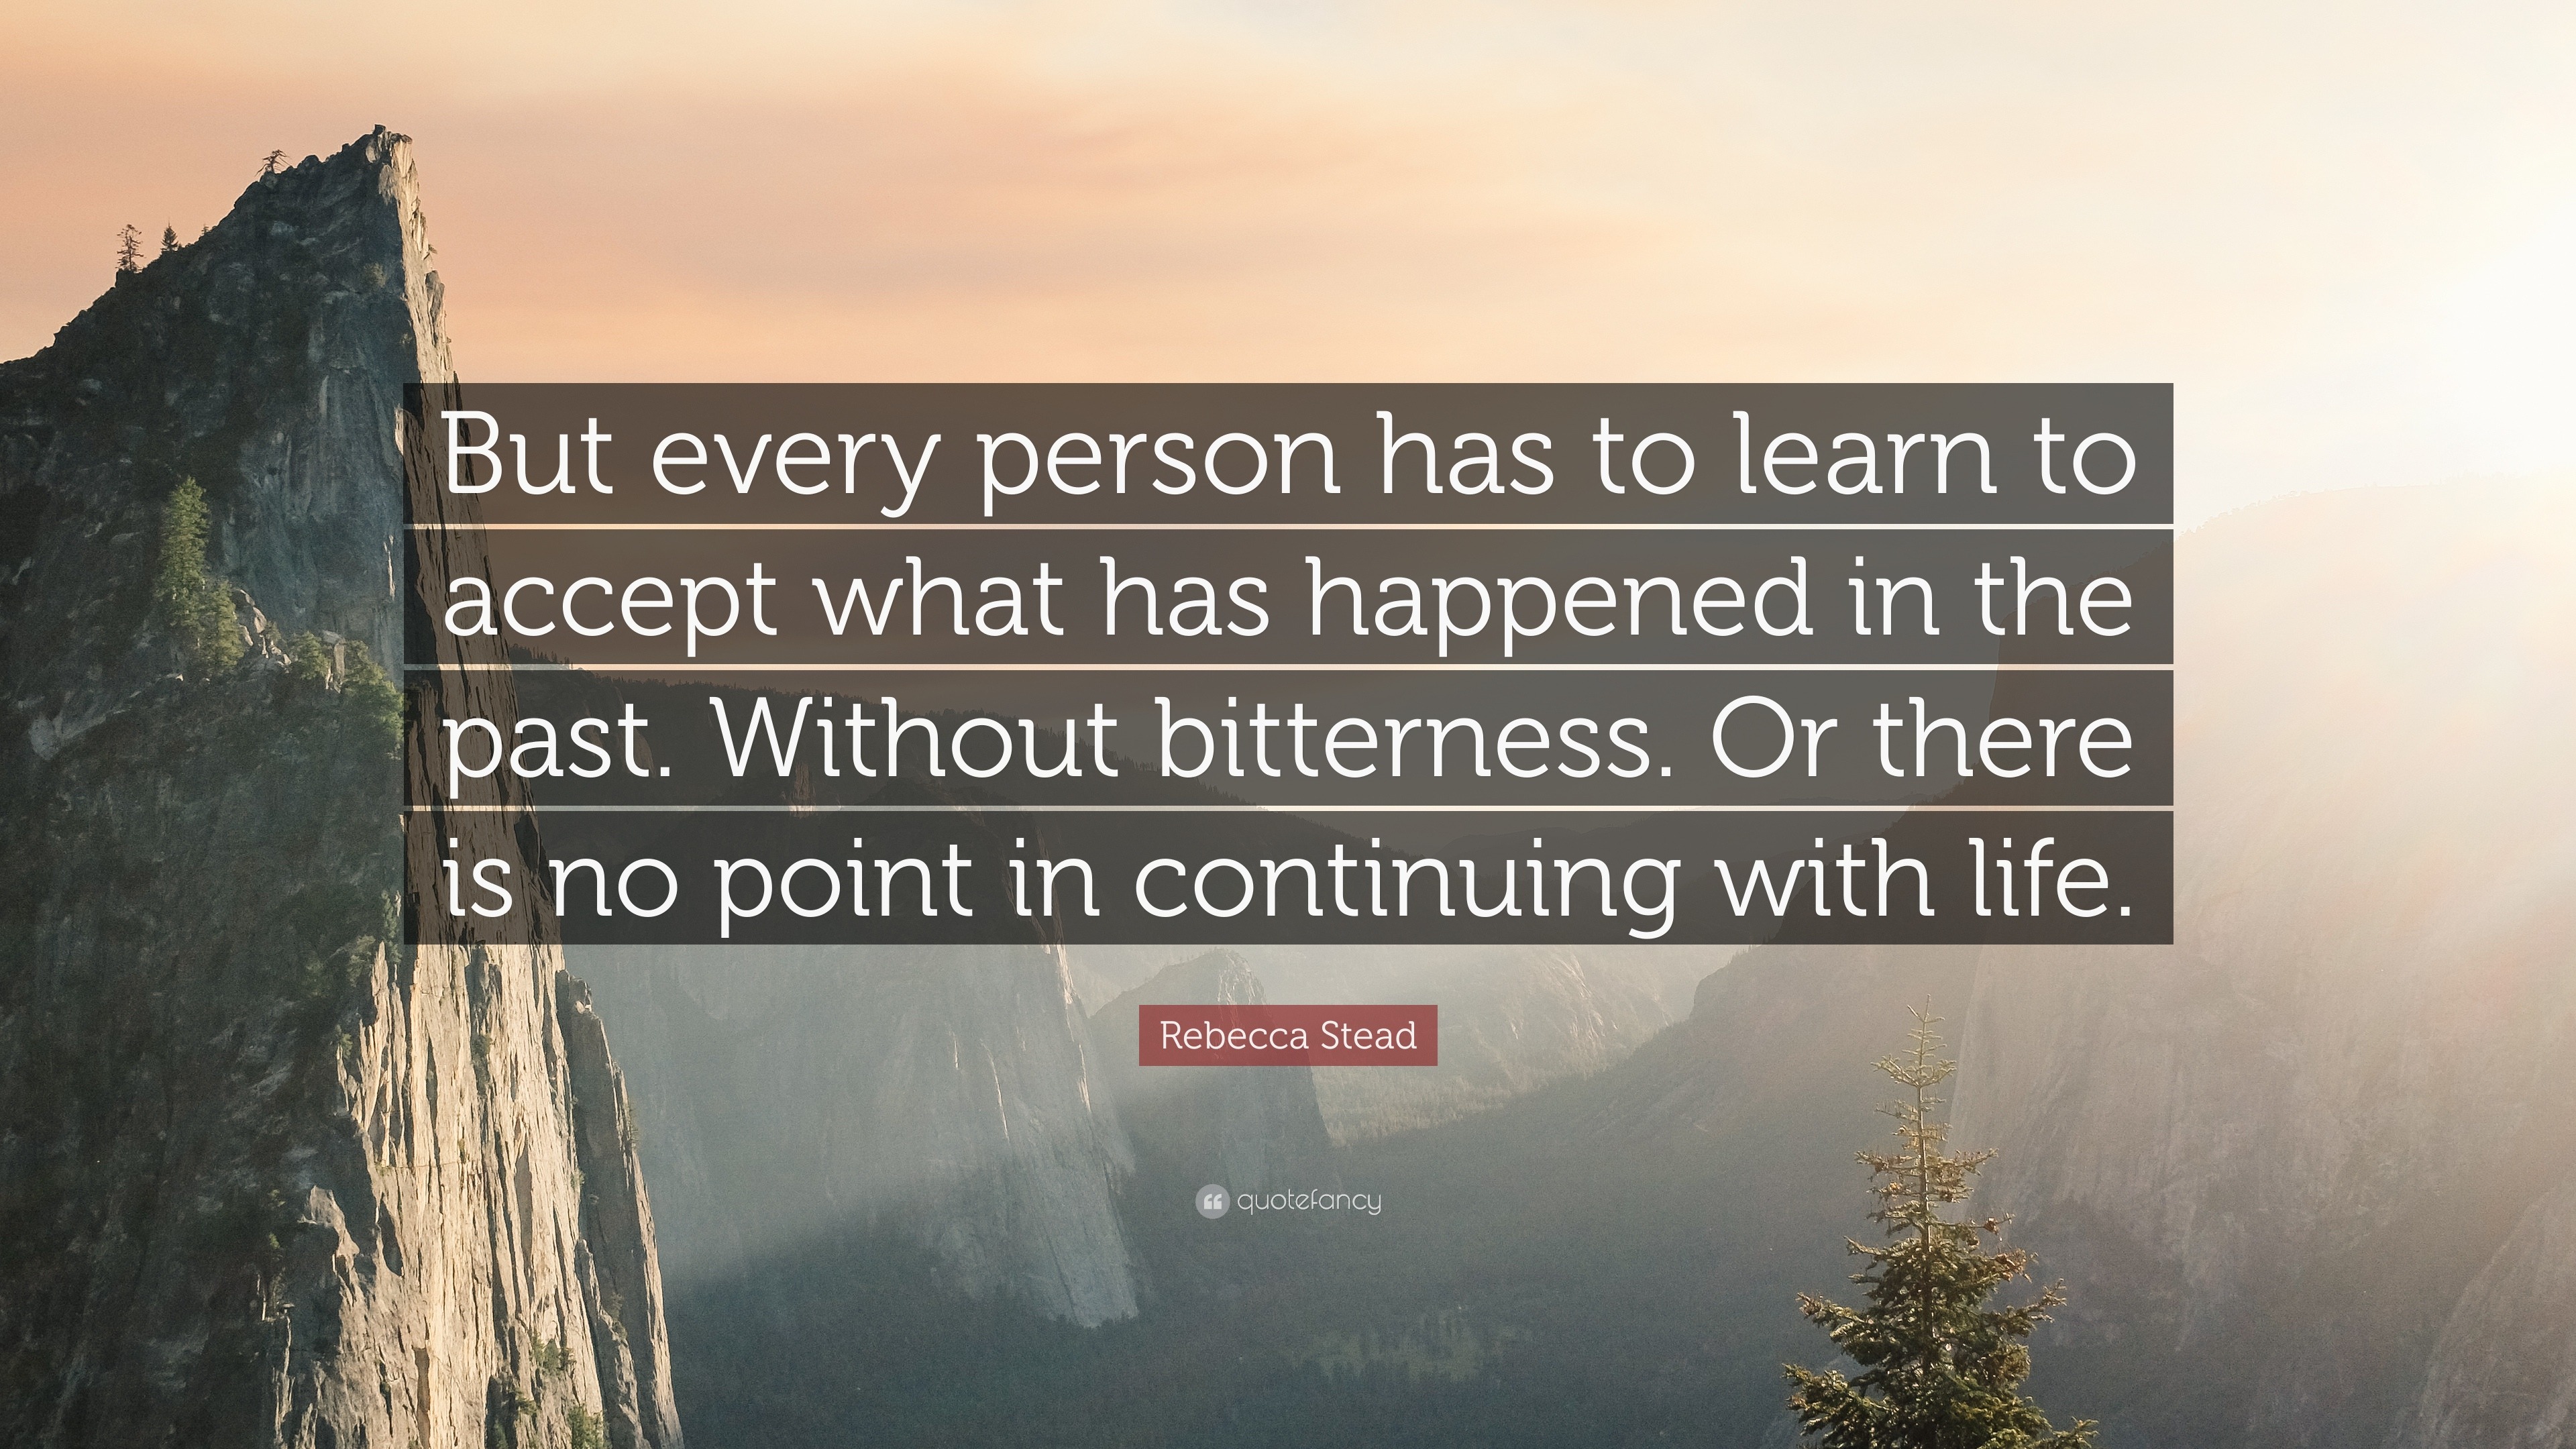 Rebecca Stead Quote: “But every person has to learn to accept what has ...